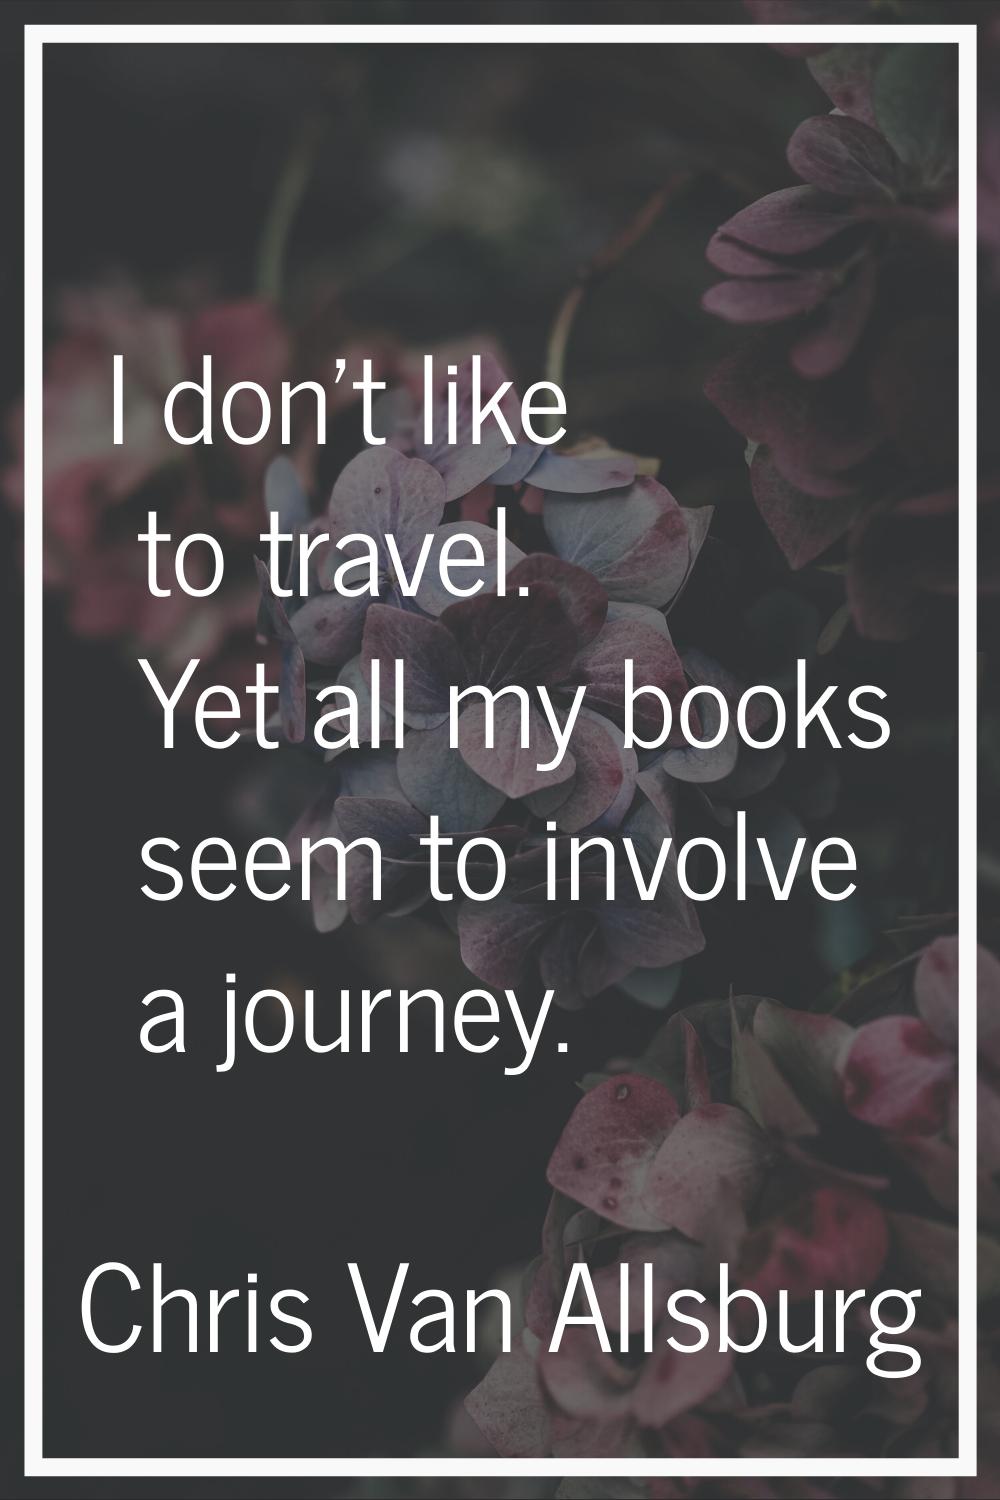 I don't like to travel. Yet all my books seem to involve a journey.